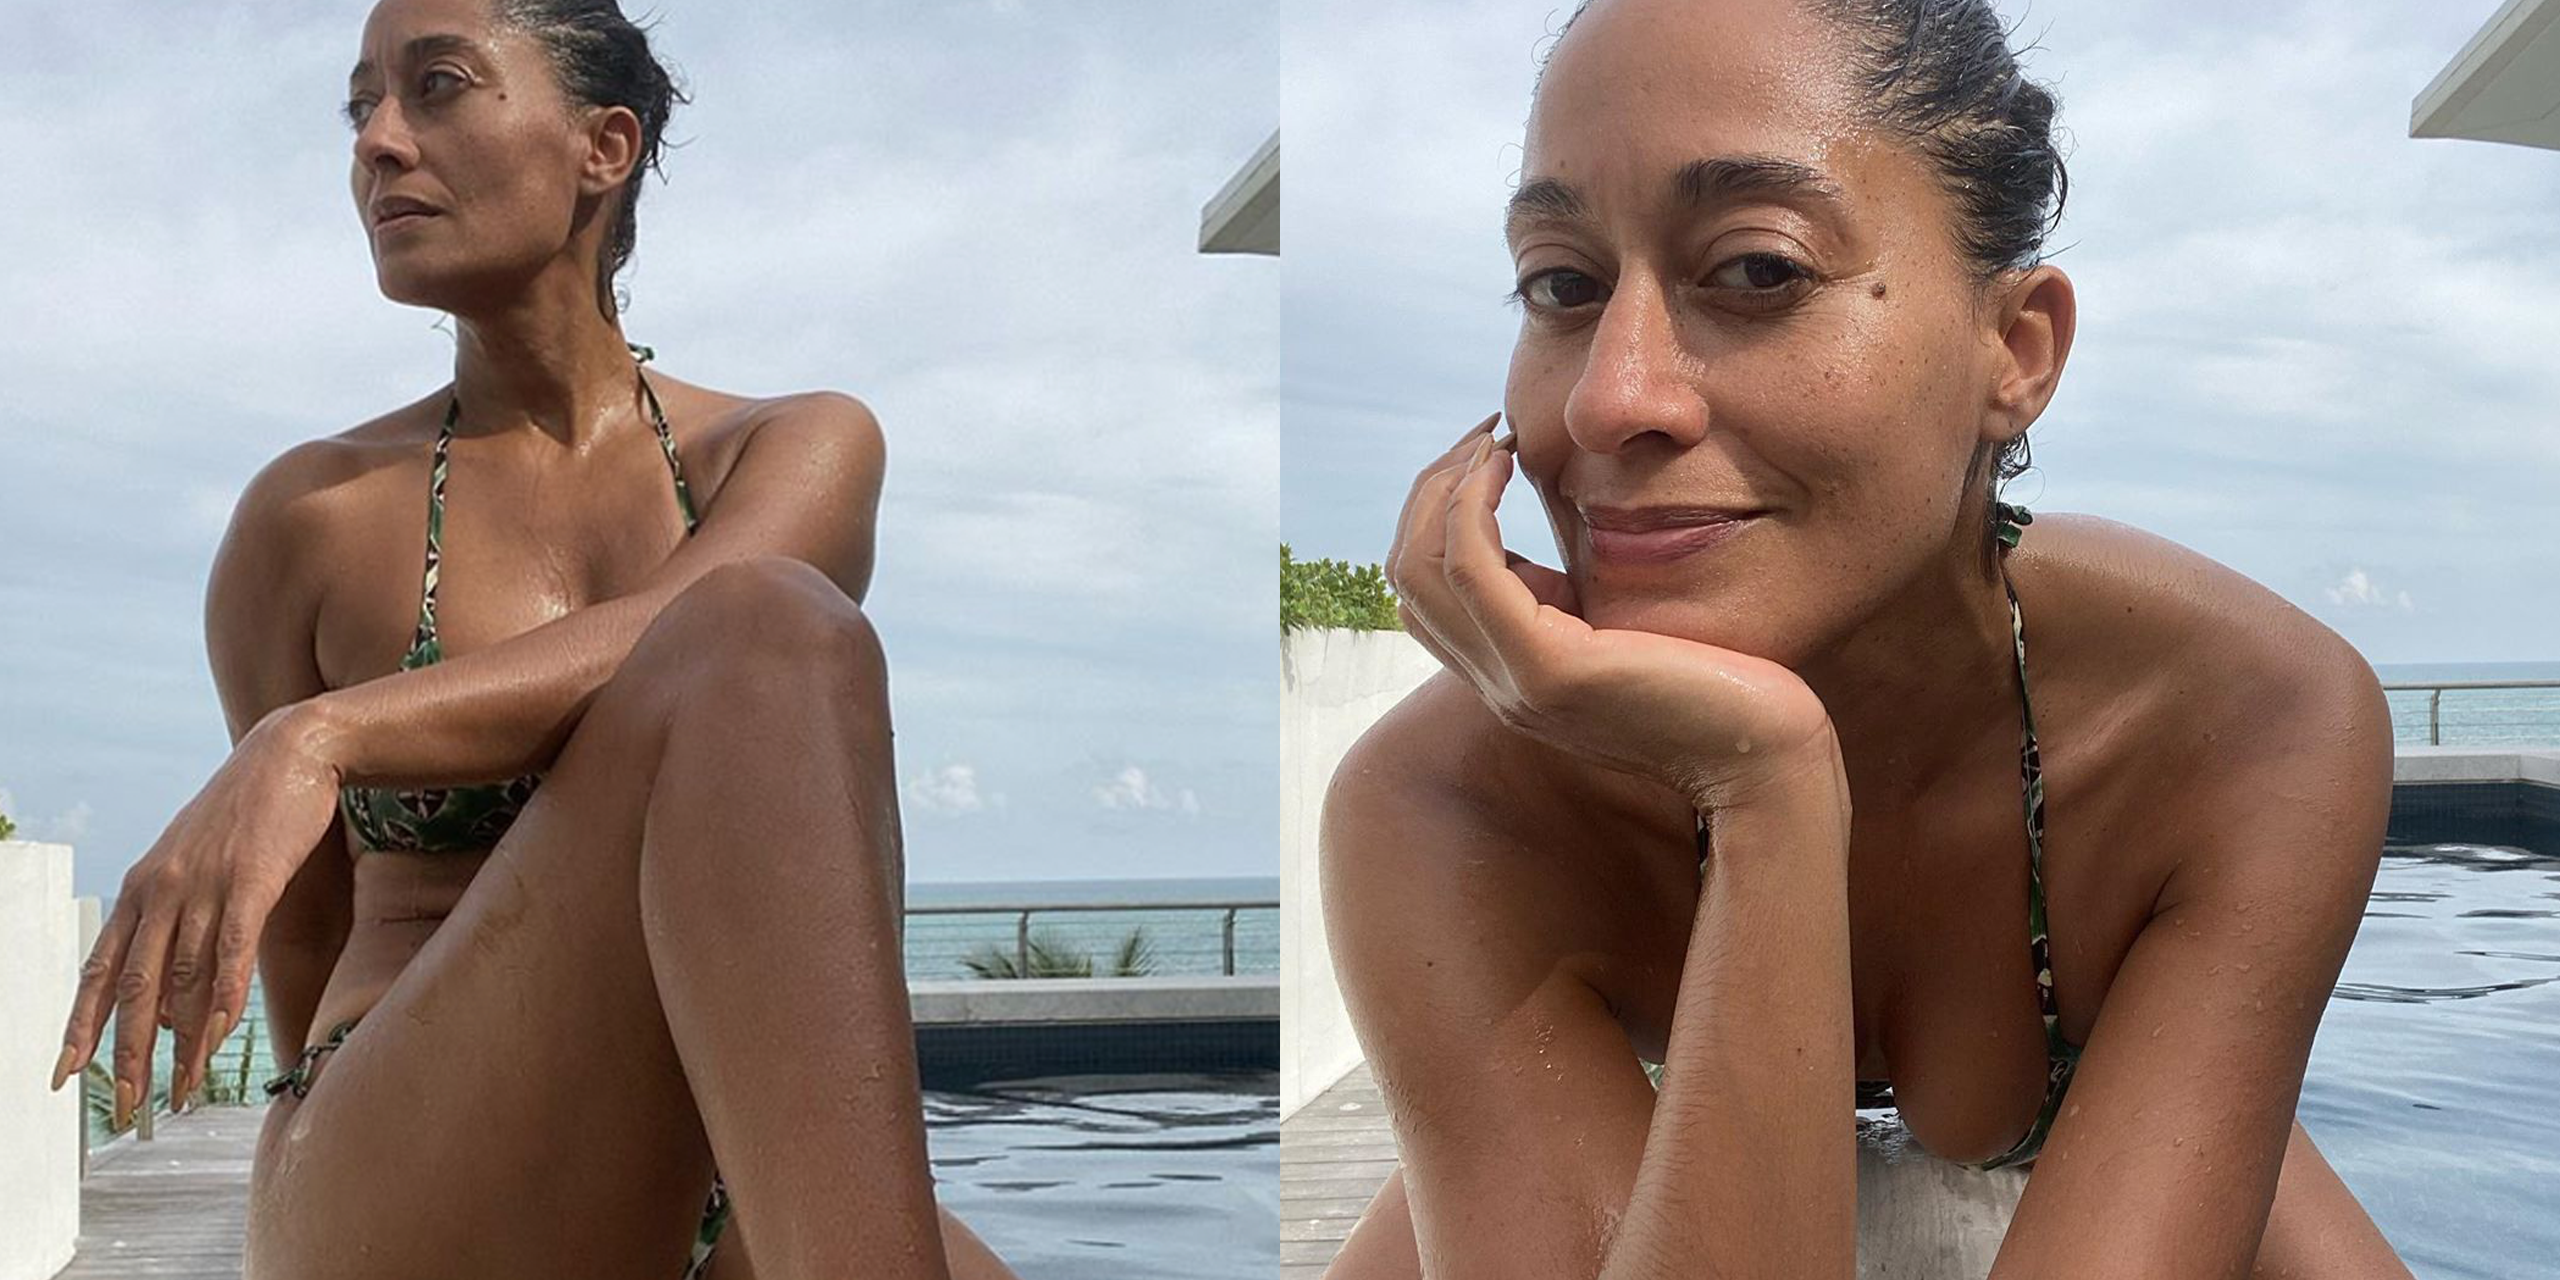 Tracee Ellis Ross, 47, Says She "Loves Getting Older" in Unretouc...